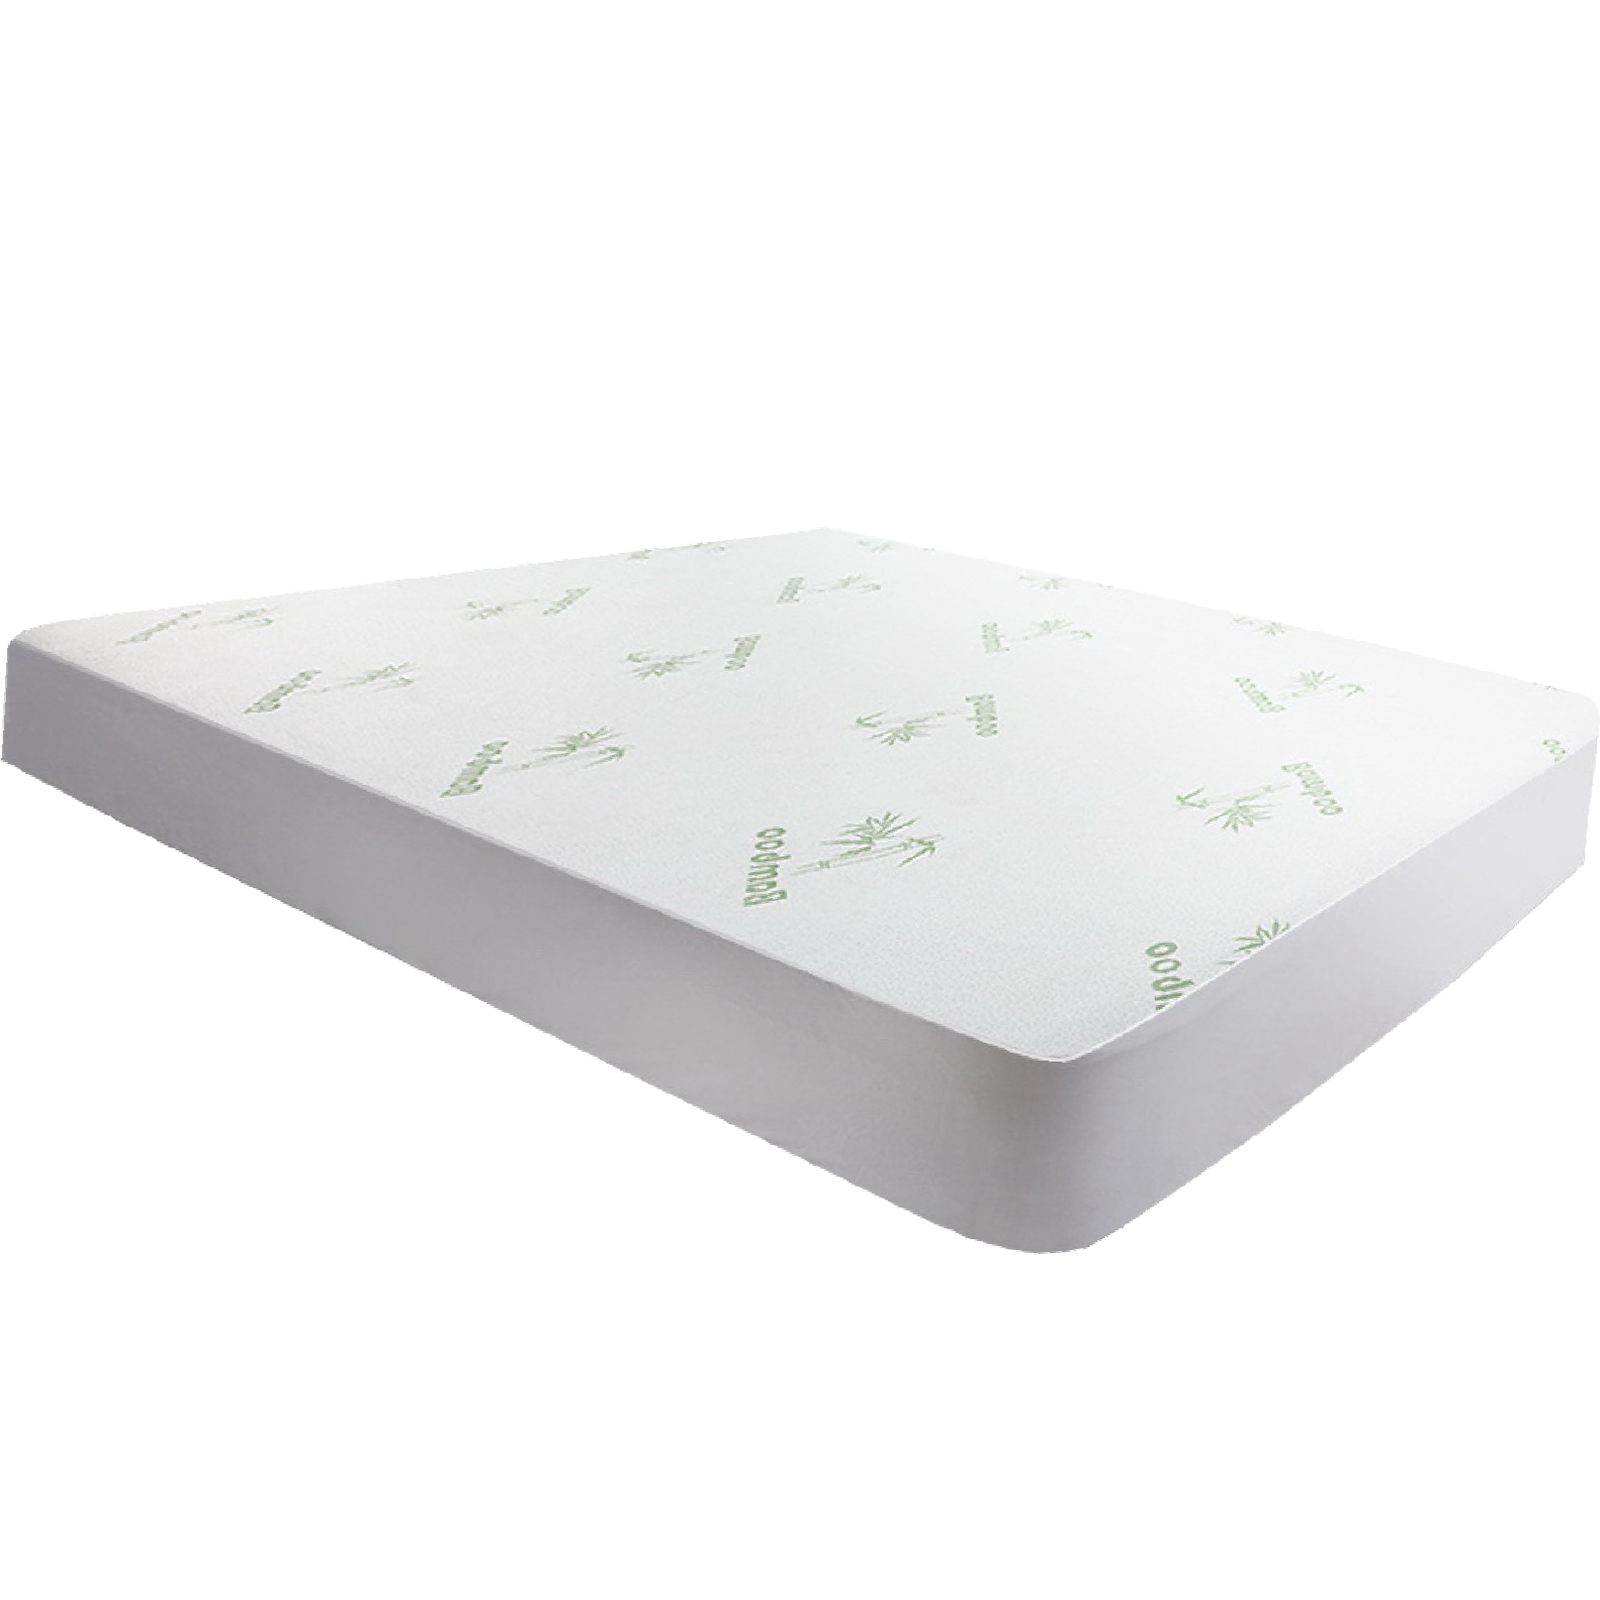 Double Size Bamboo Mattress Bed Protector Waterproof PU Coating